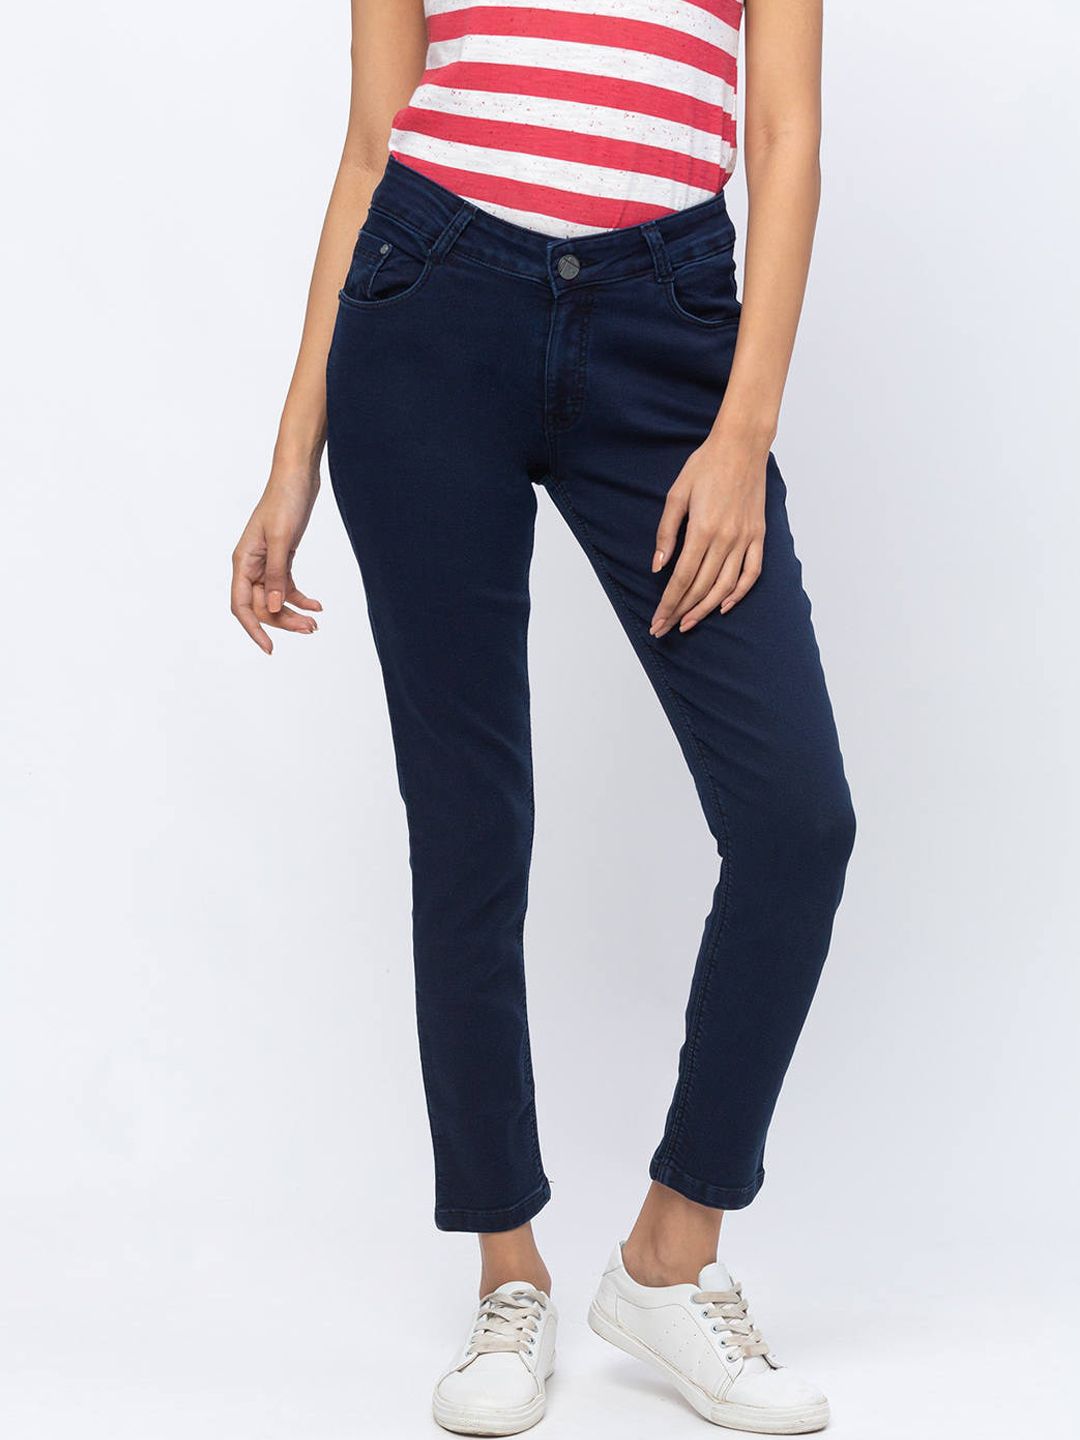 ZOLA Women Blue Pencil Fit Jeans Price in India